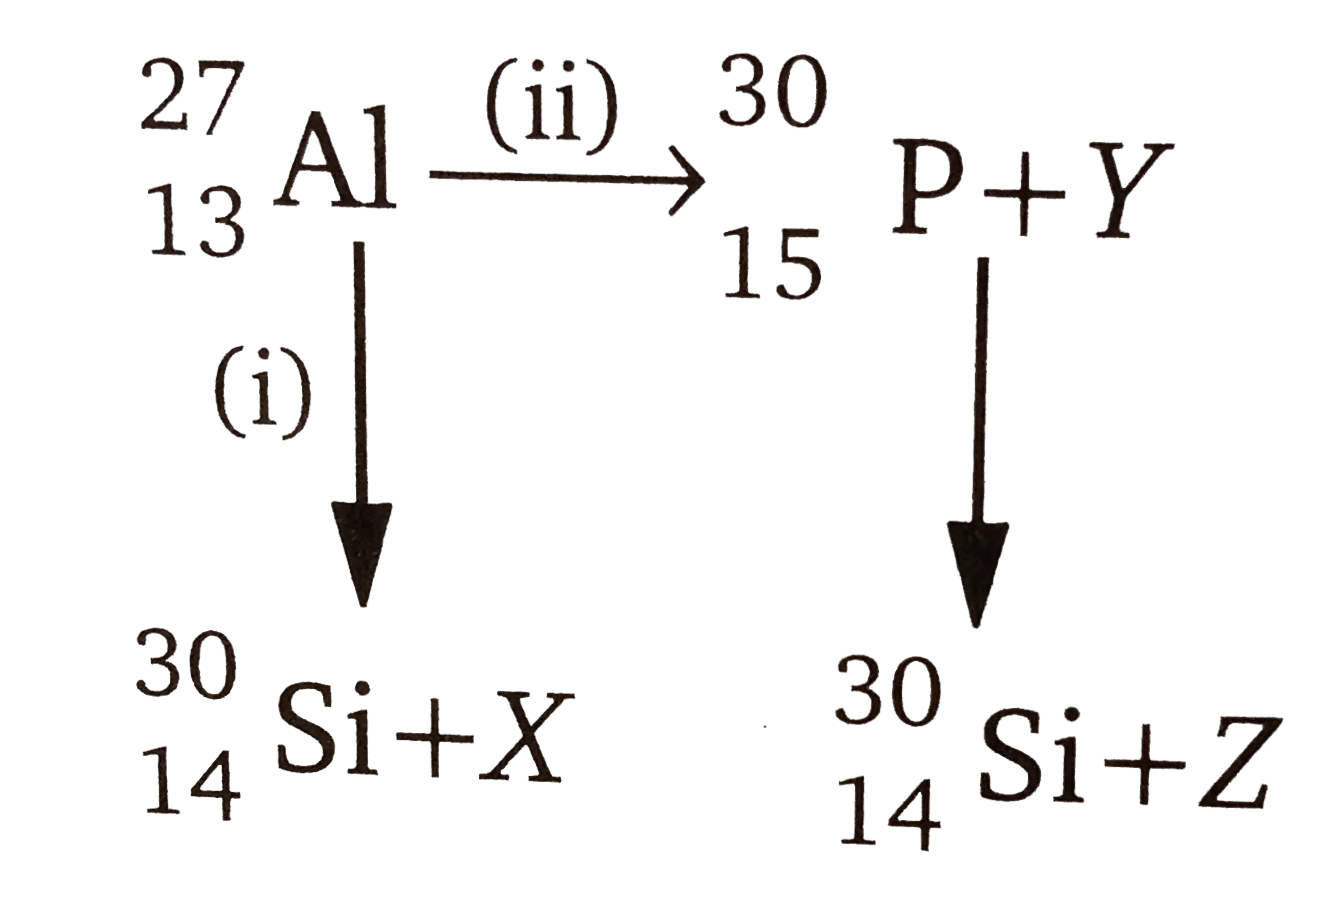 Bombaradment of aluminium by alpha- particle leads to its artifical disinetegration in two ways, (i) and (ii) as shwon. Produces  X,Y and Z respectively are,